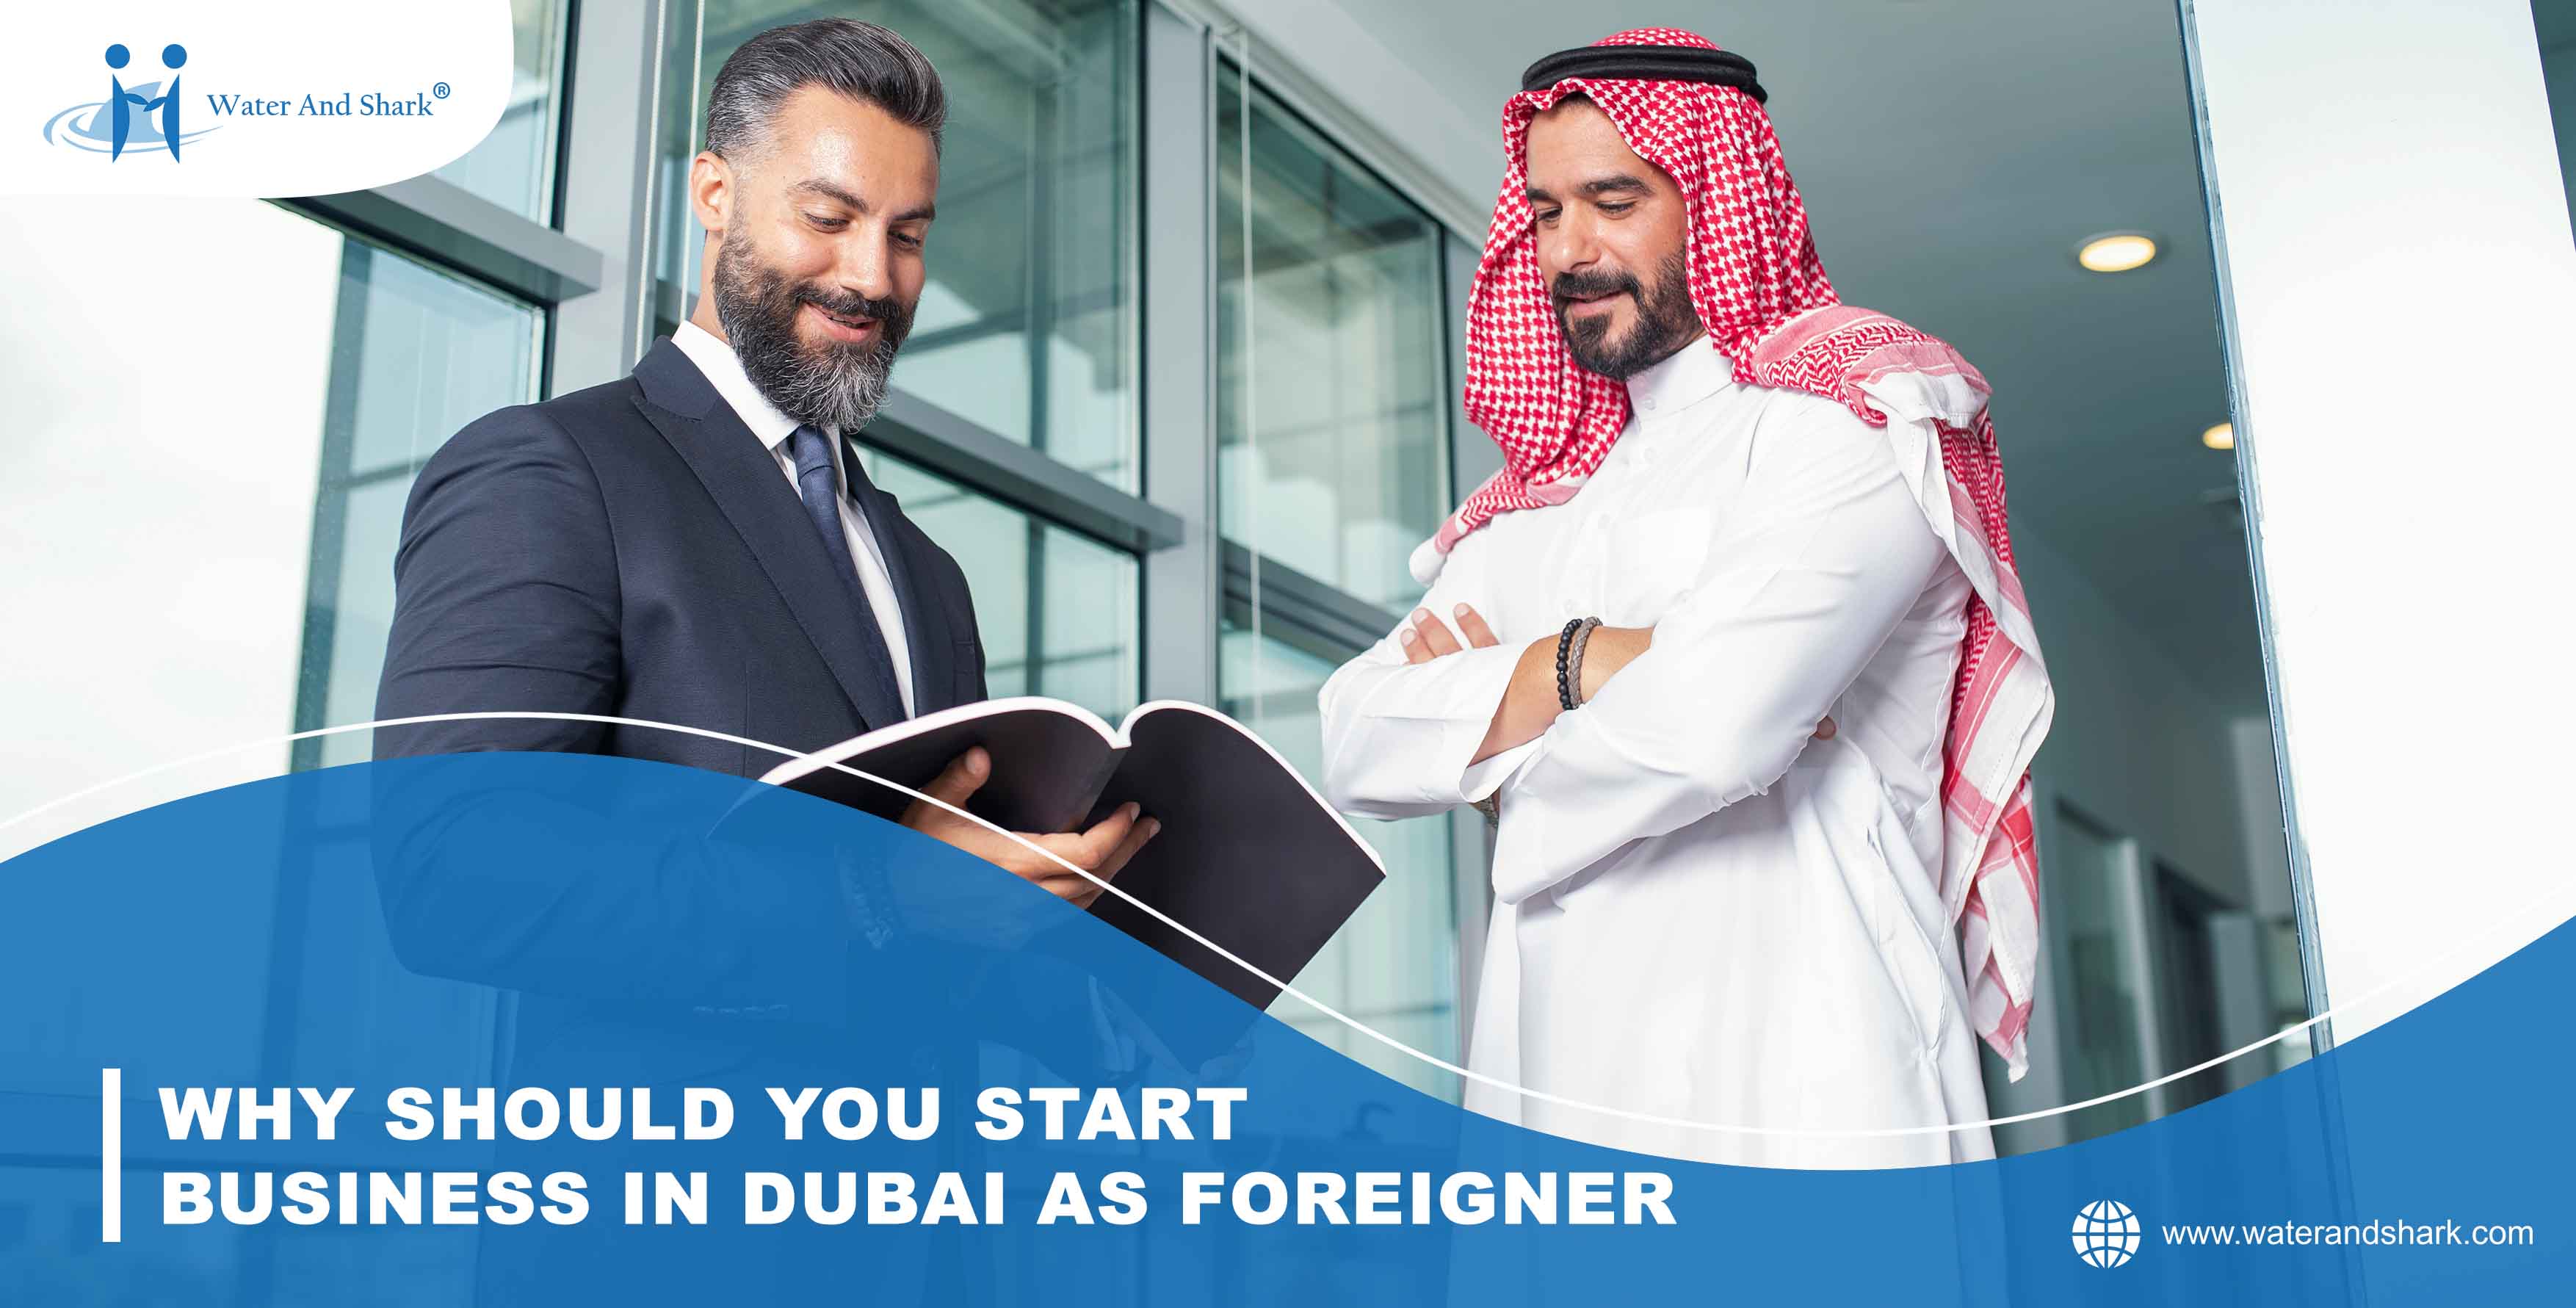 650x1280_WHY_SHOULD_YOU_START_BUSINESS_IN_DUBAI_AS_FOREIGNER_low_ize.jpg